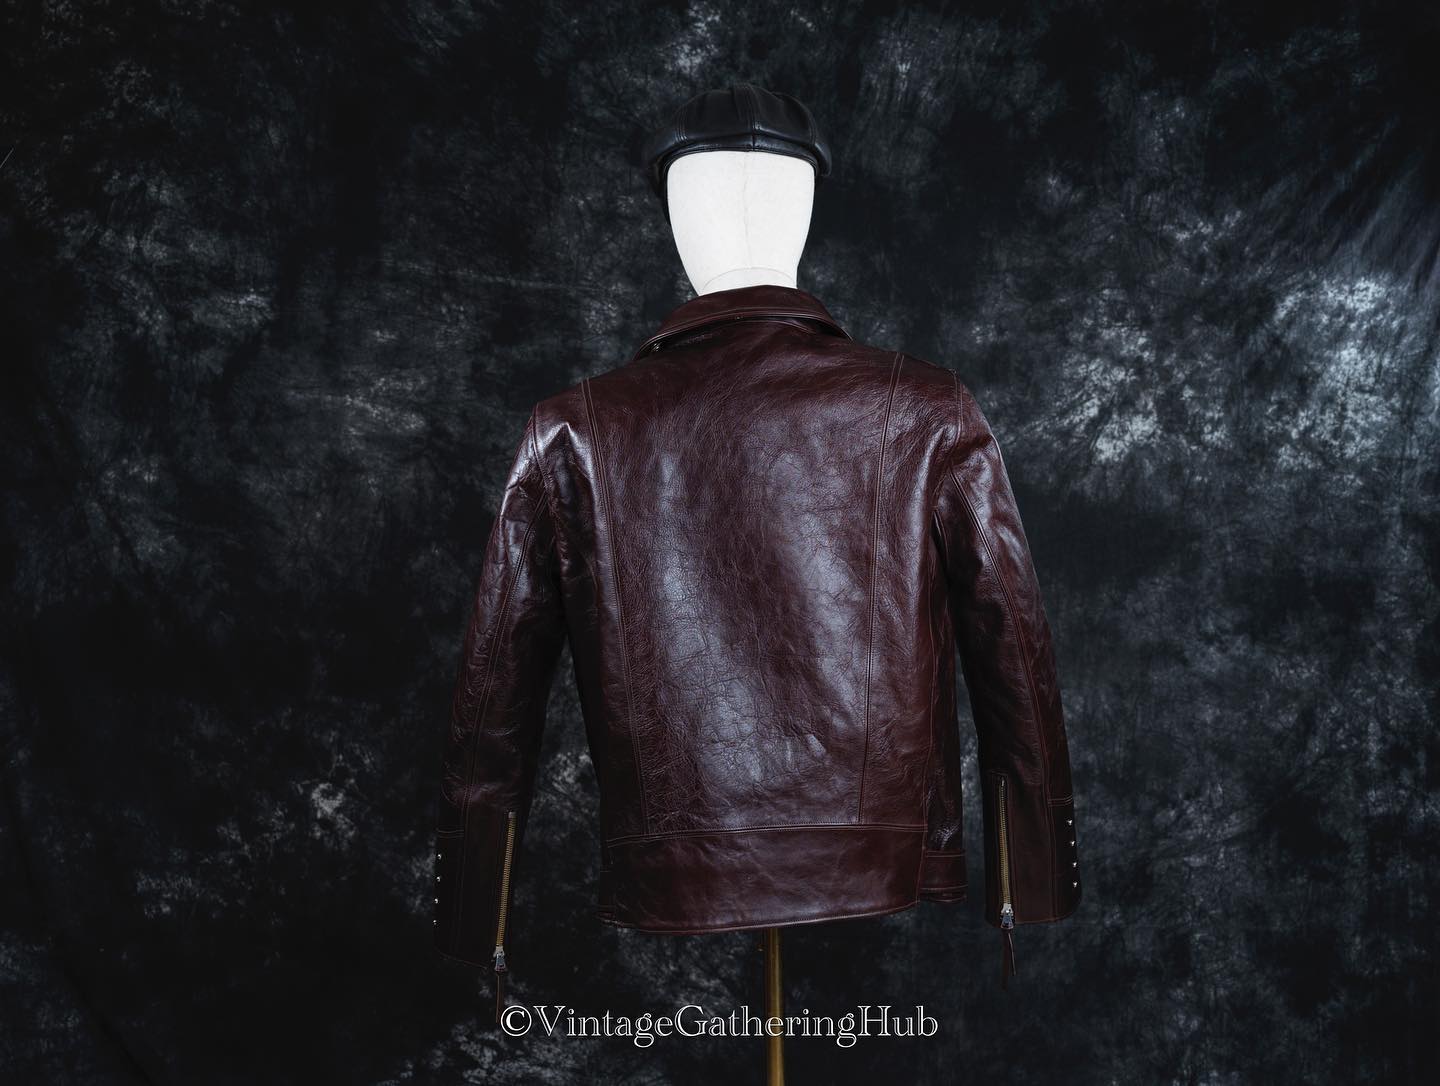 For SALE or TRADE: Fountainhead Leather Beta Jacket size 44 in